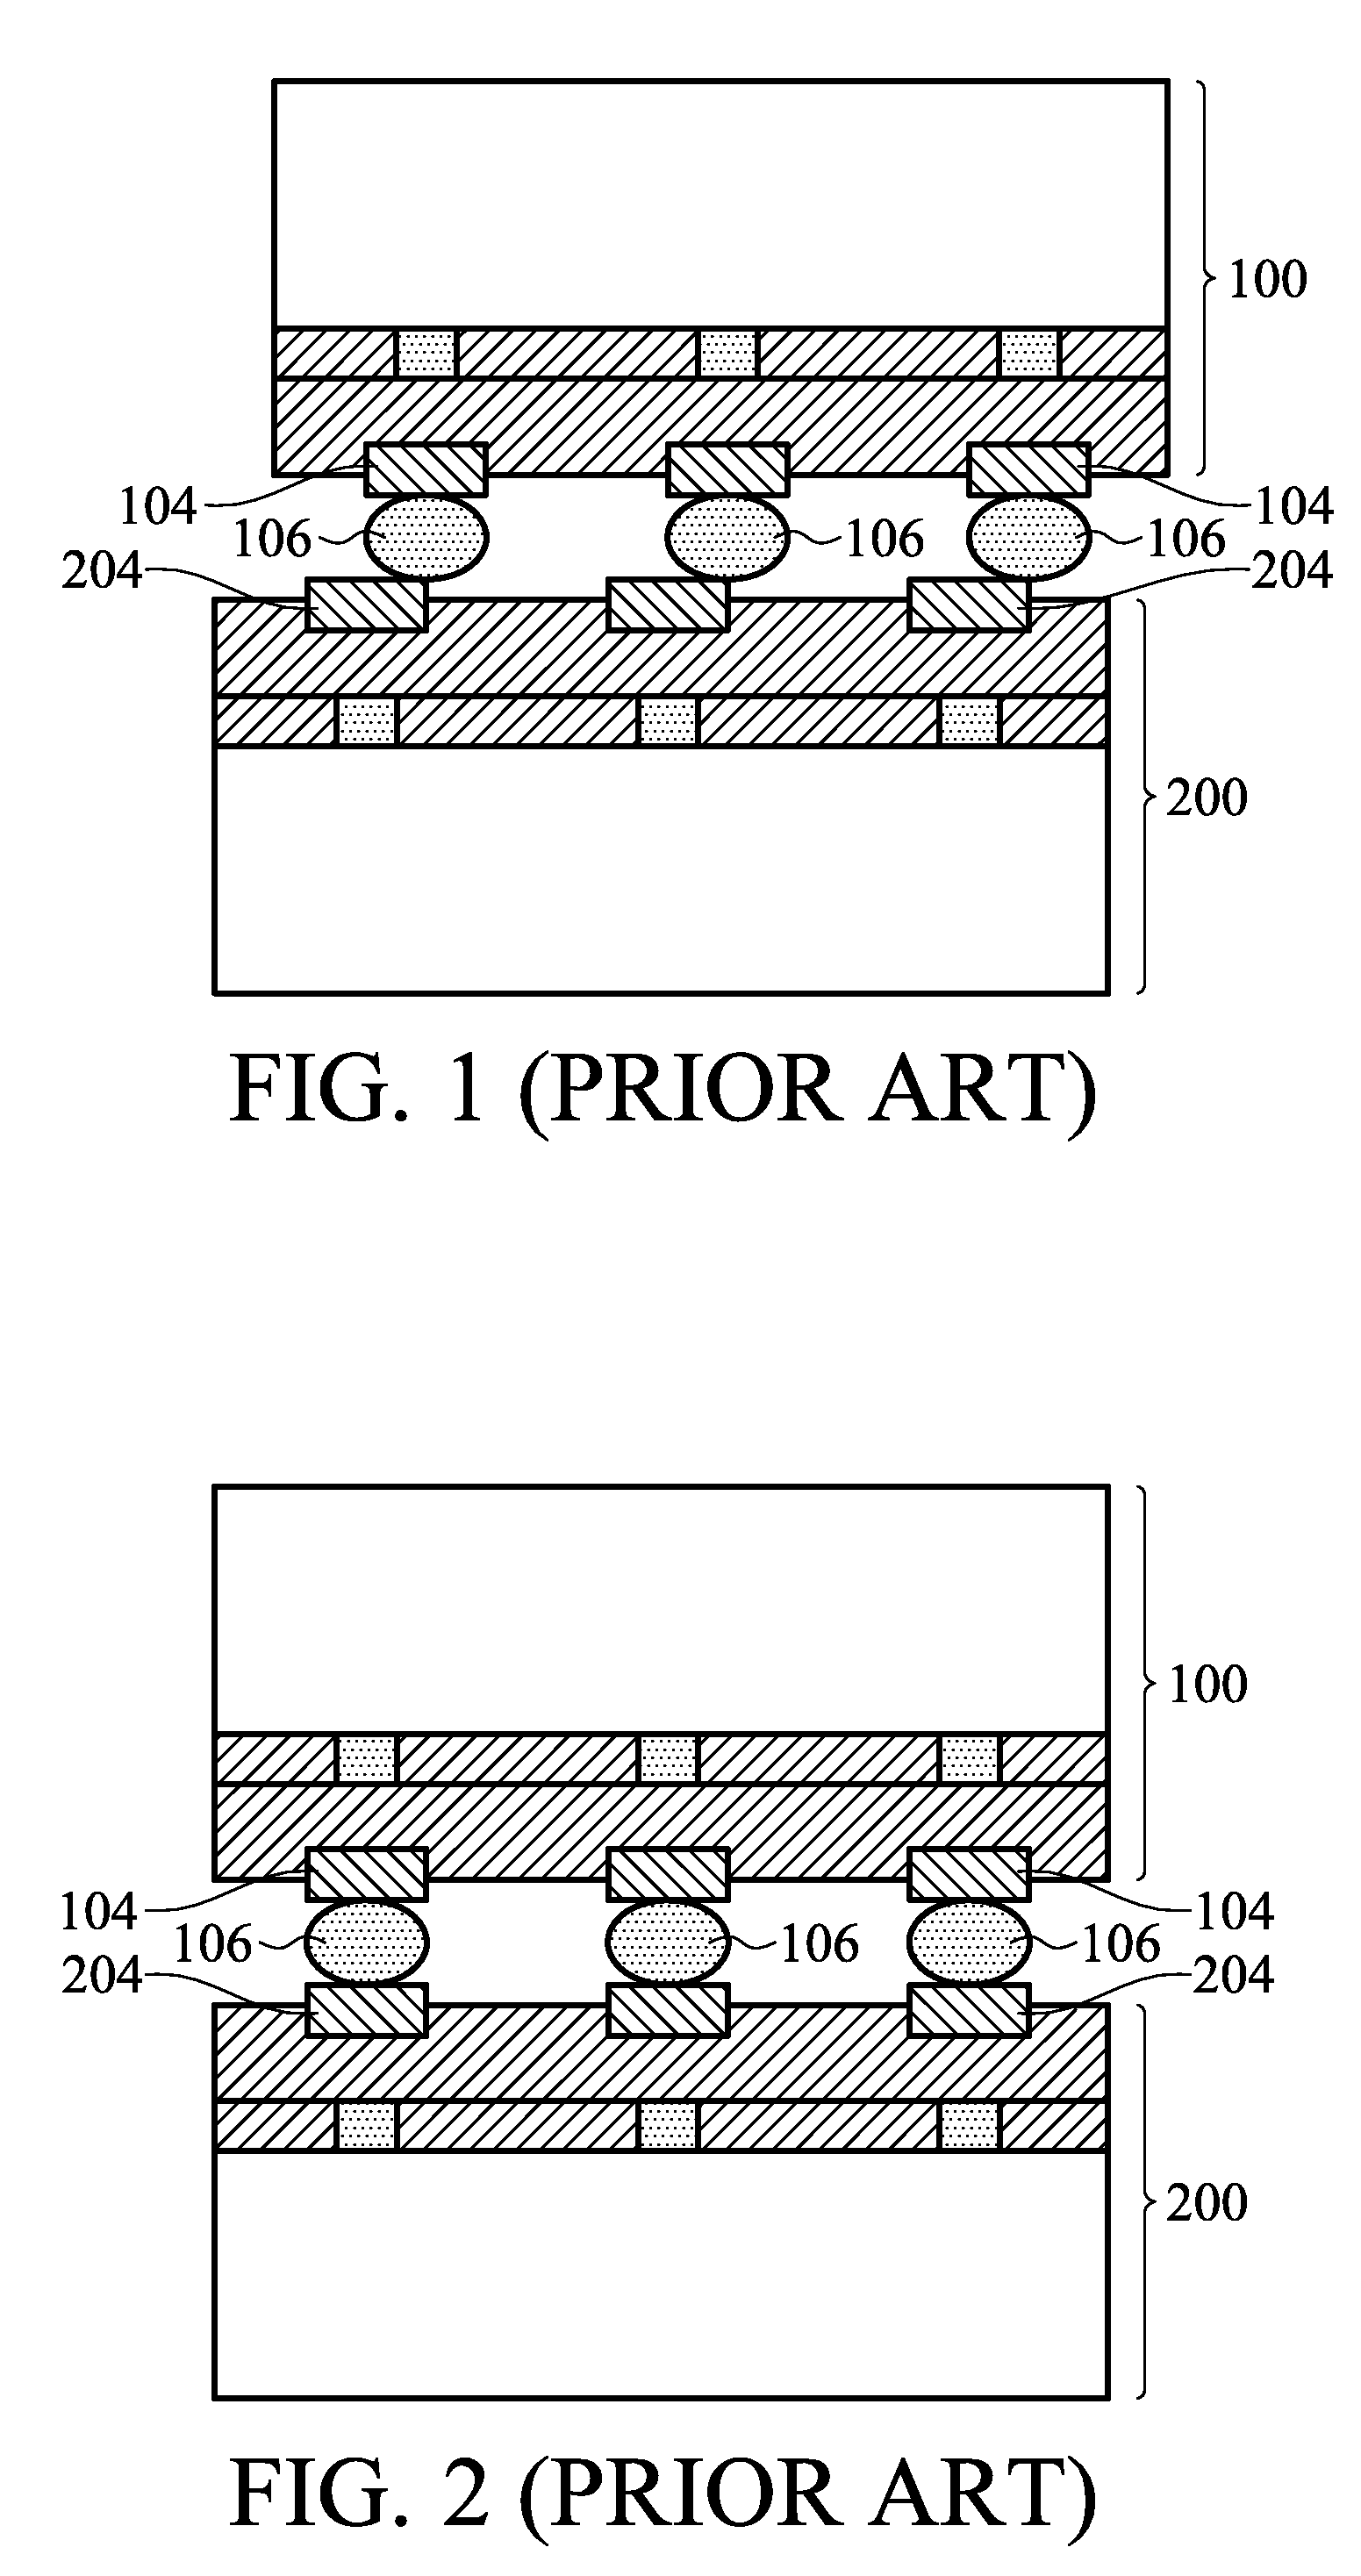 Component stacking using pre-formed adhesive films